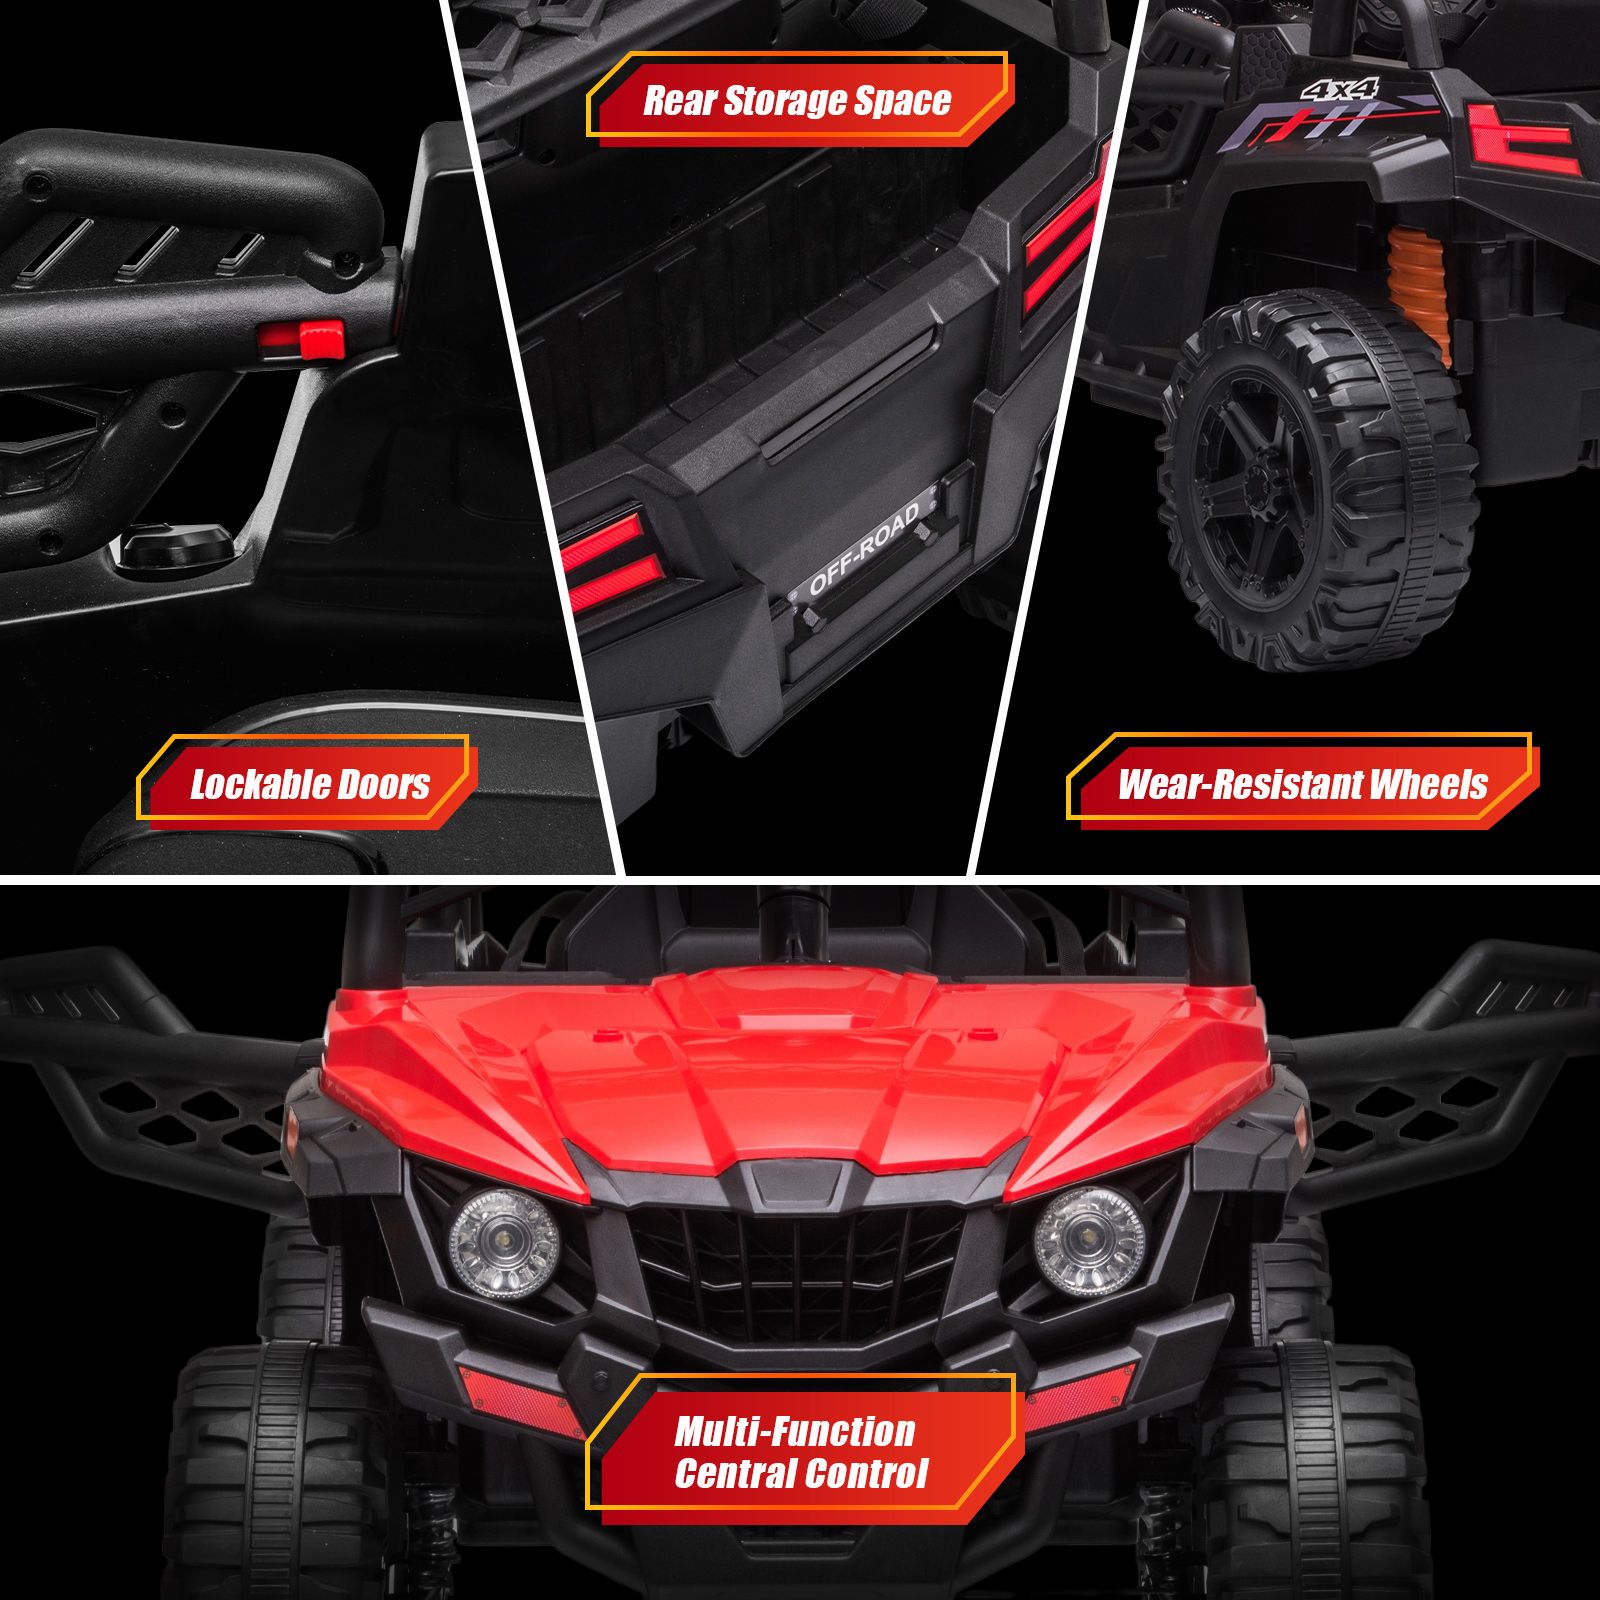 Kids Electric Car UTV Battery Remote Control Ride On Toy Vehicle Charging Off Road Racing Jeep 12V Red Lights Music Radio Rear Storage